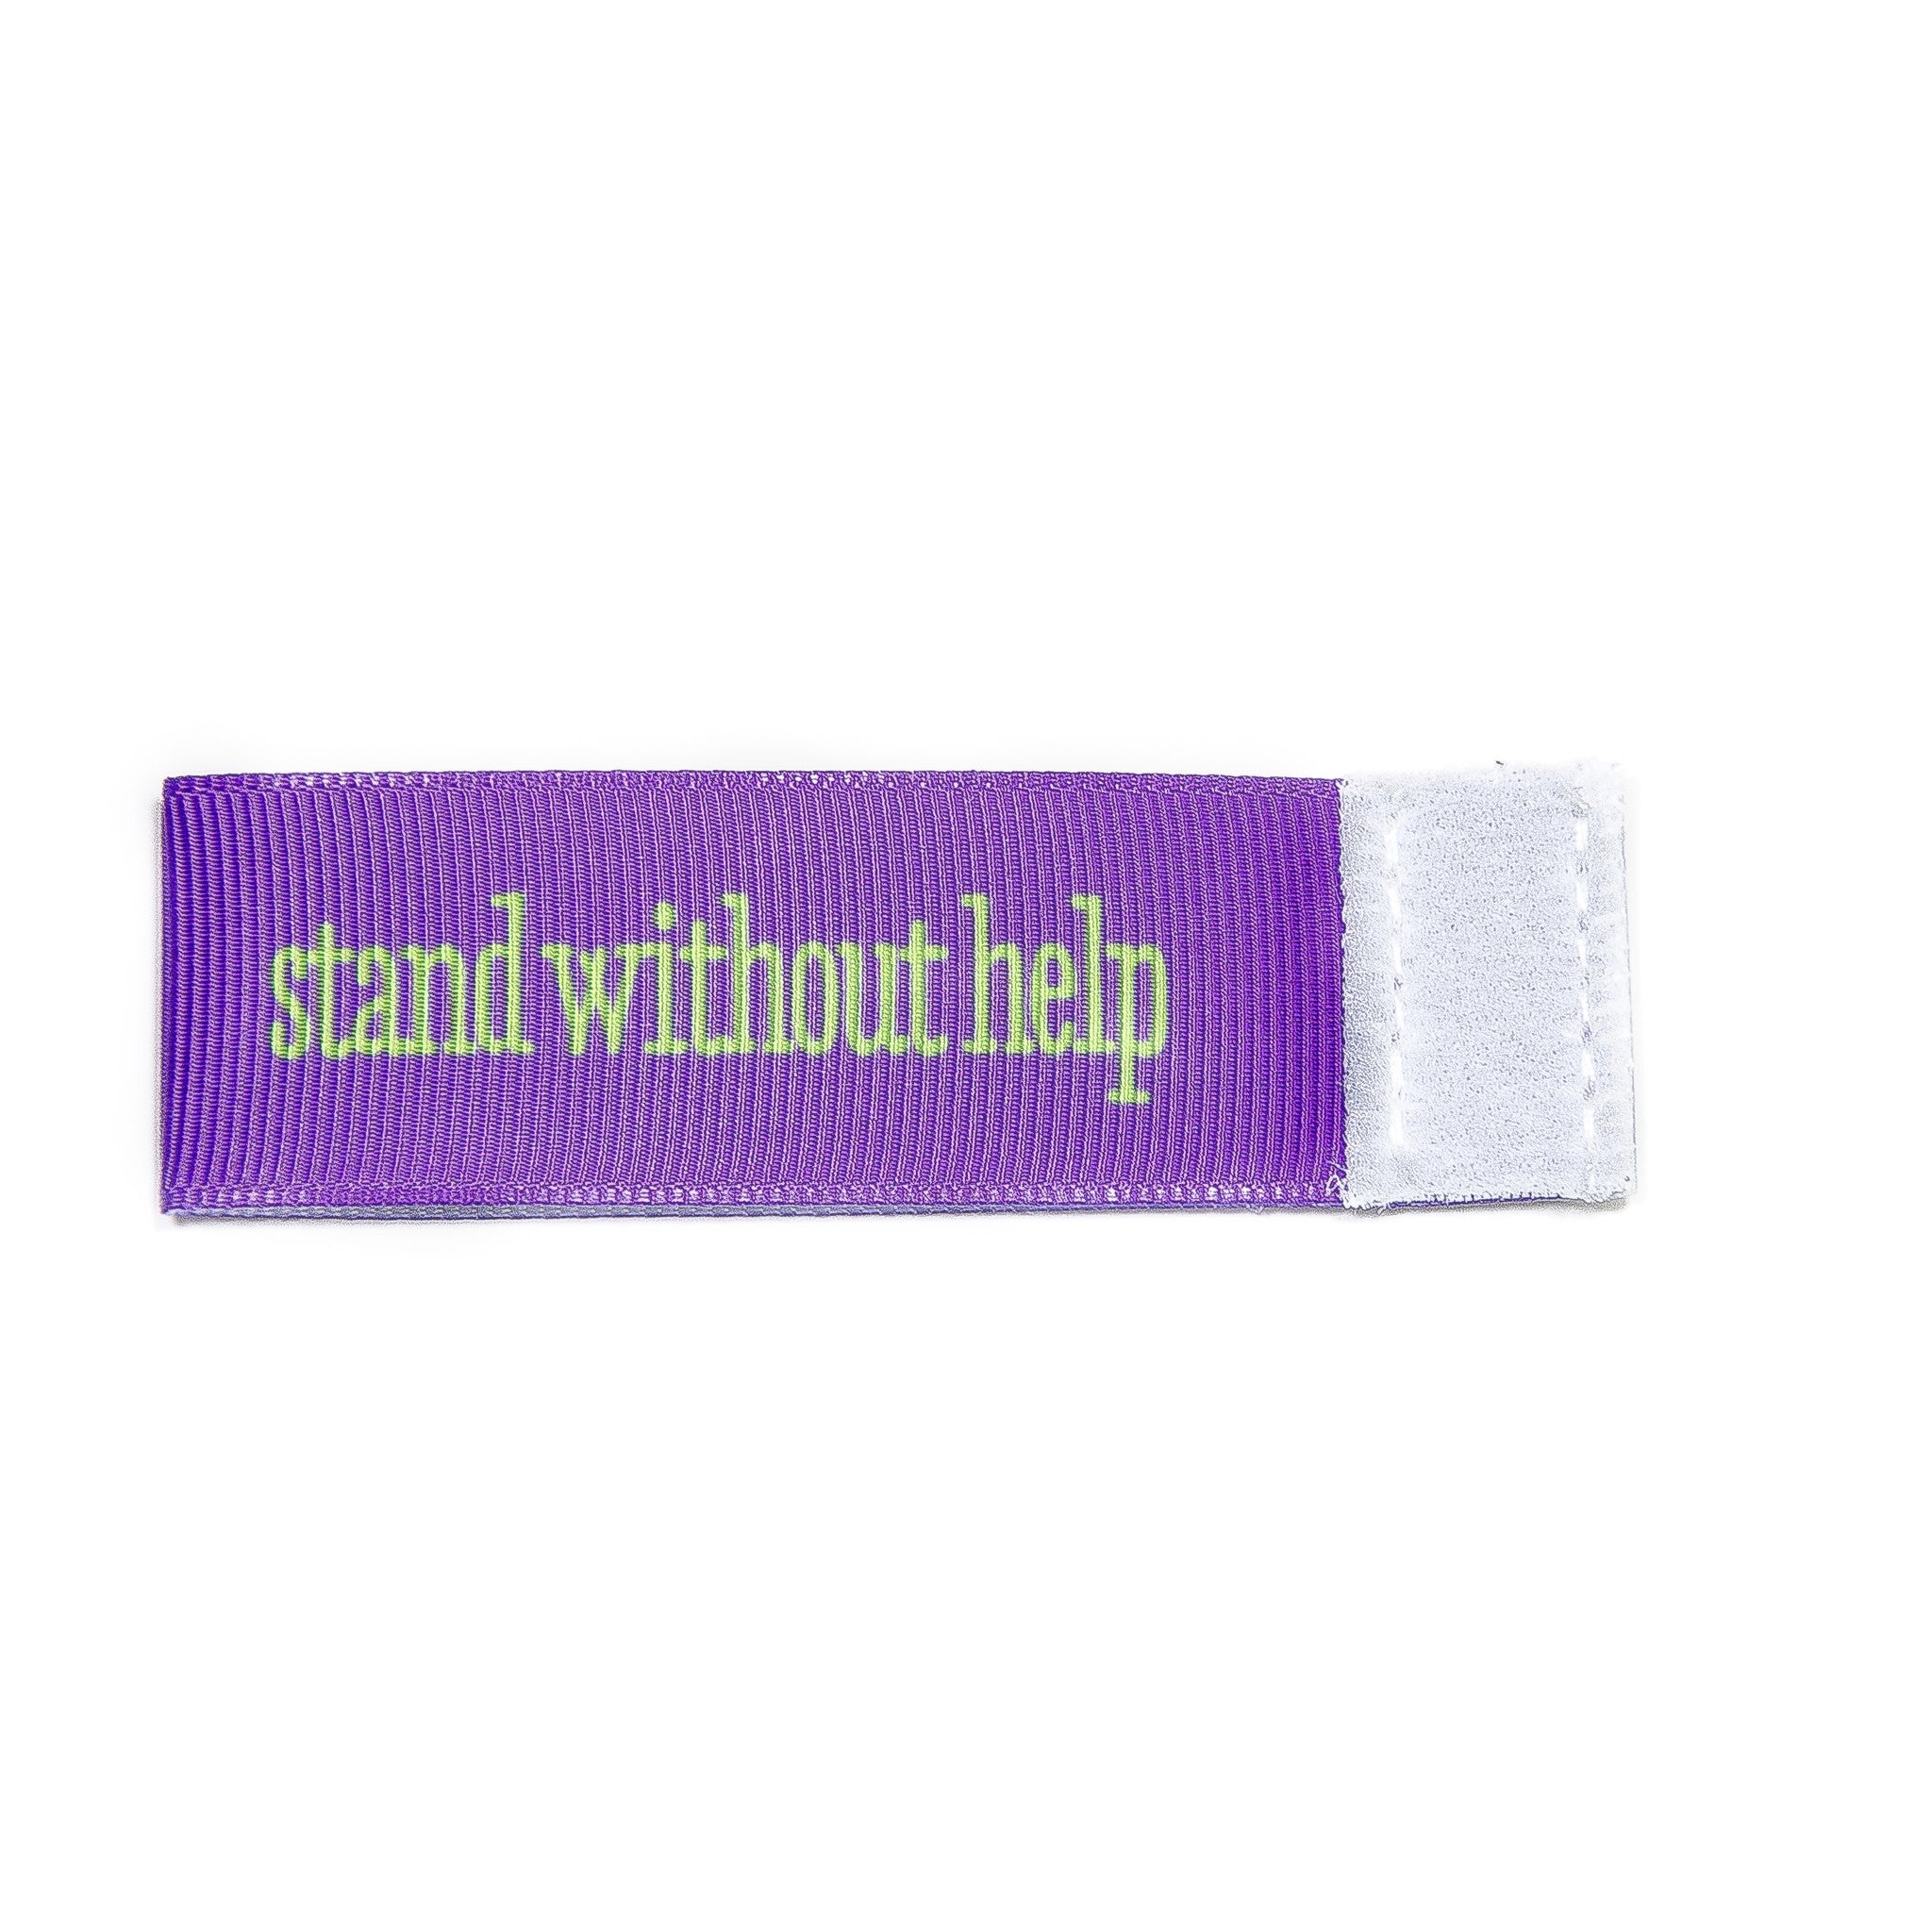 stand without help Wee Charm ribbon purple